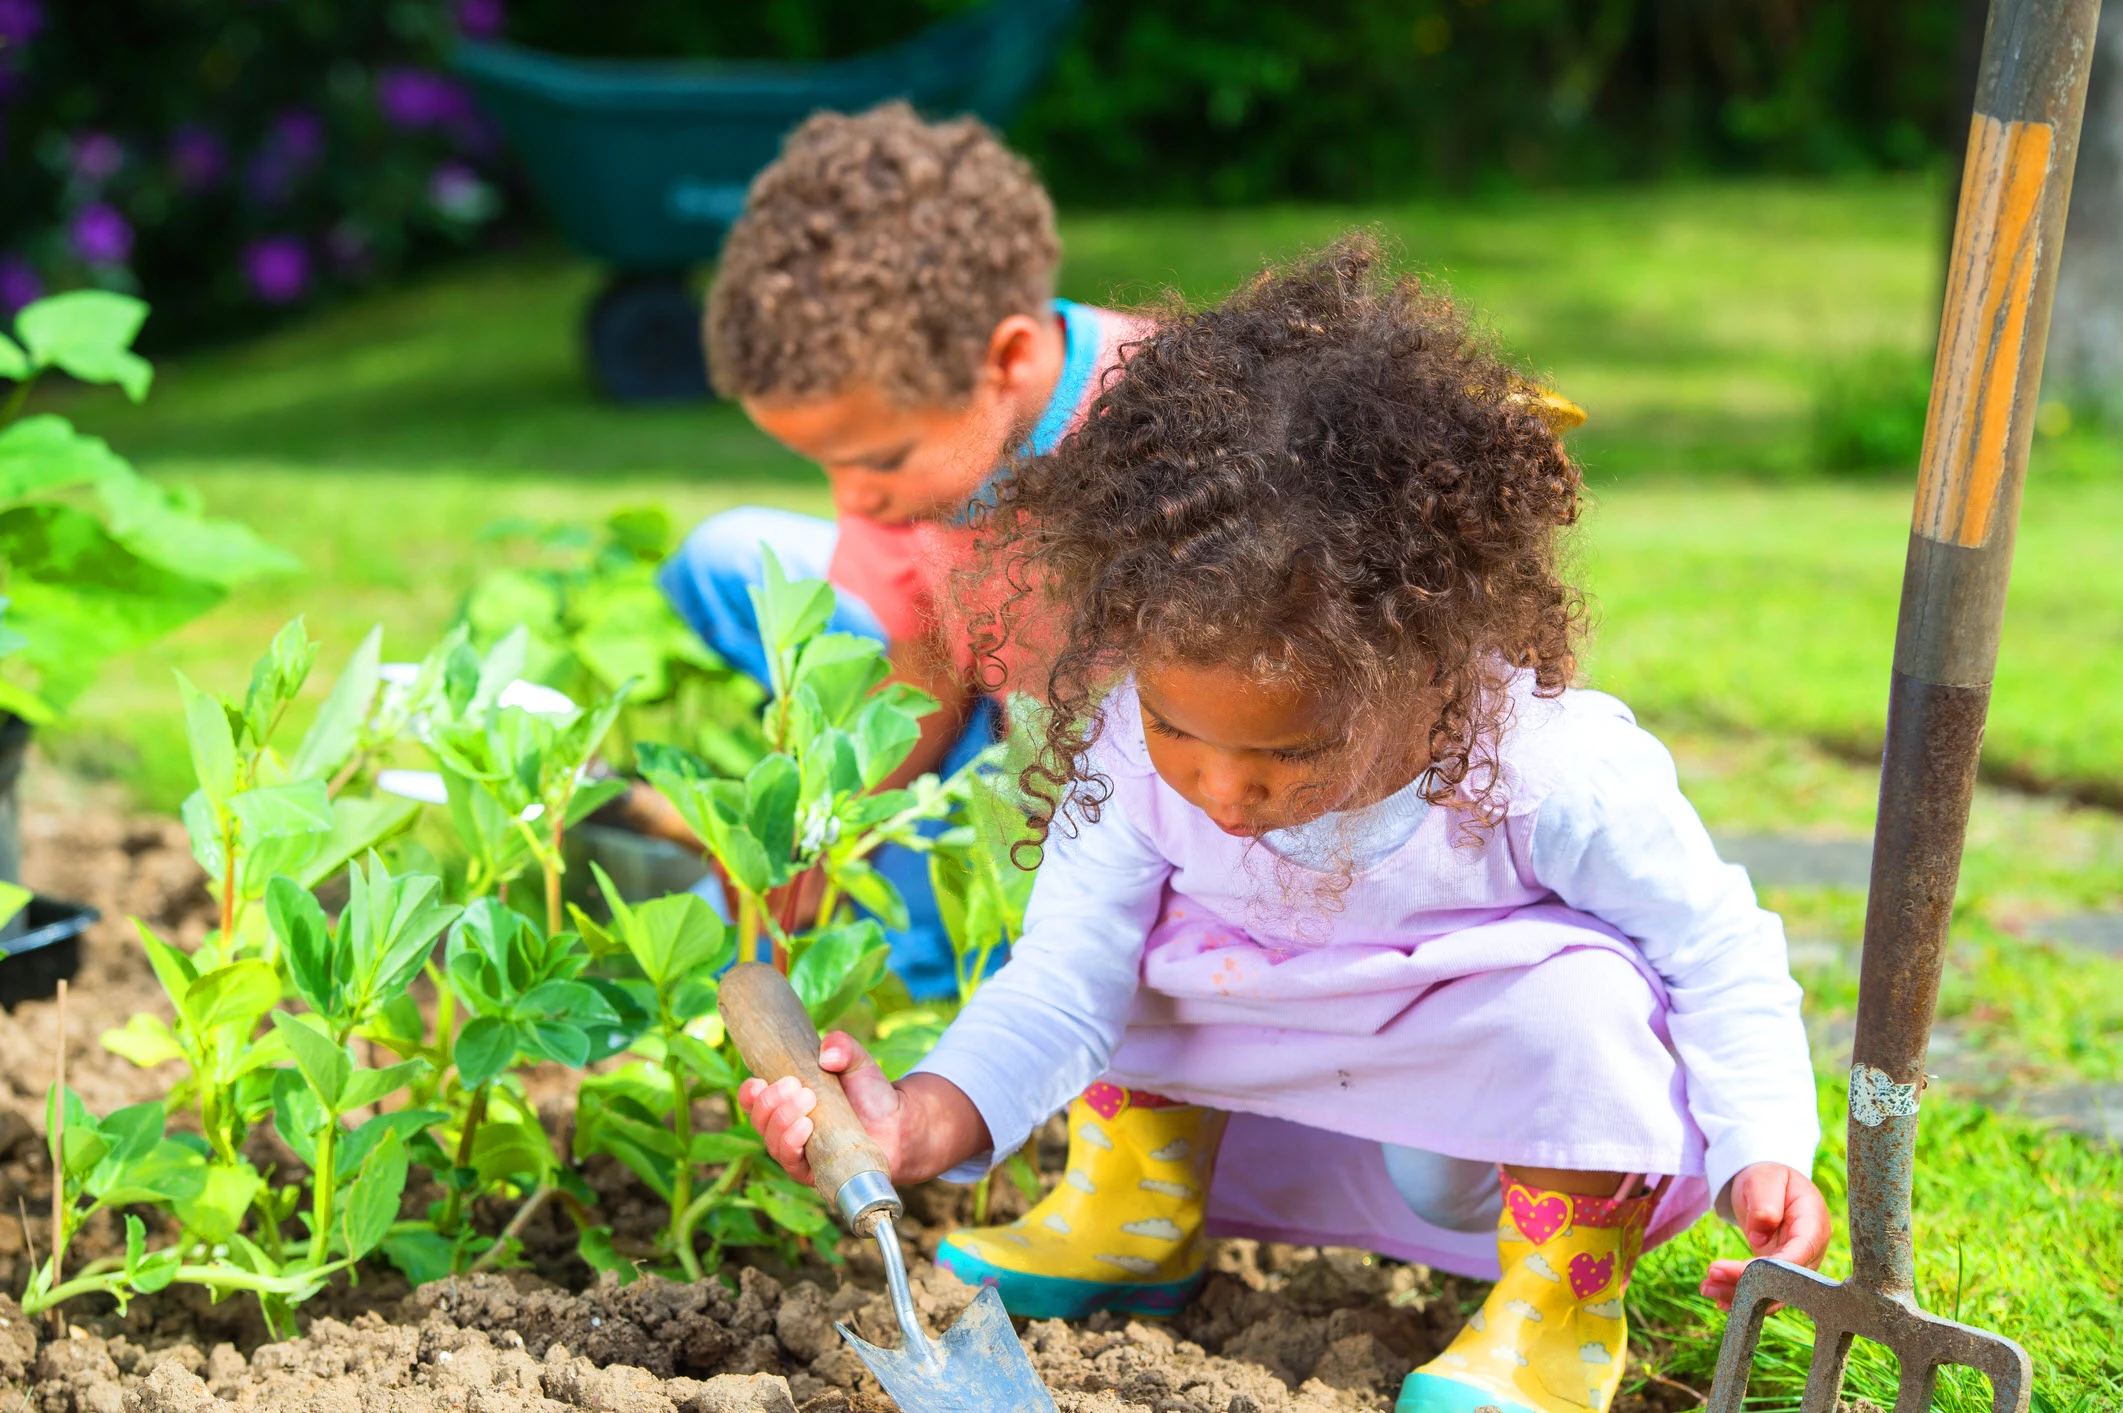 two small children, a boy and a girl, gardening near green plants